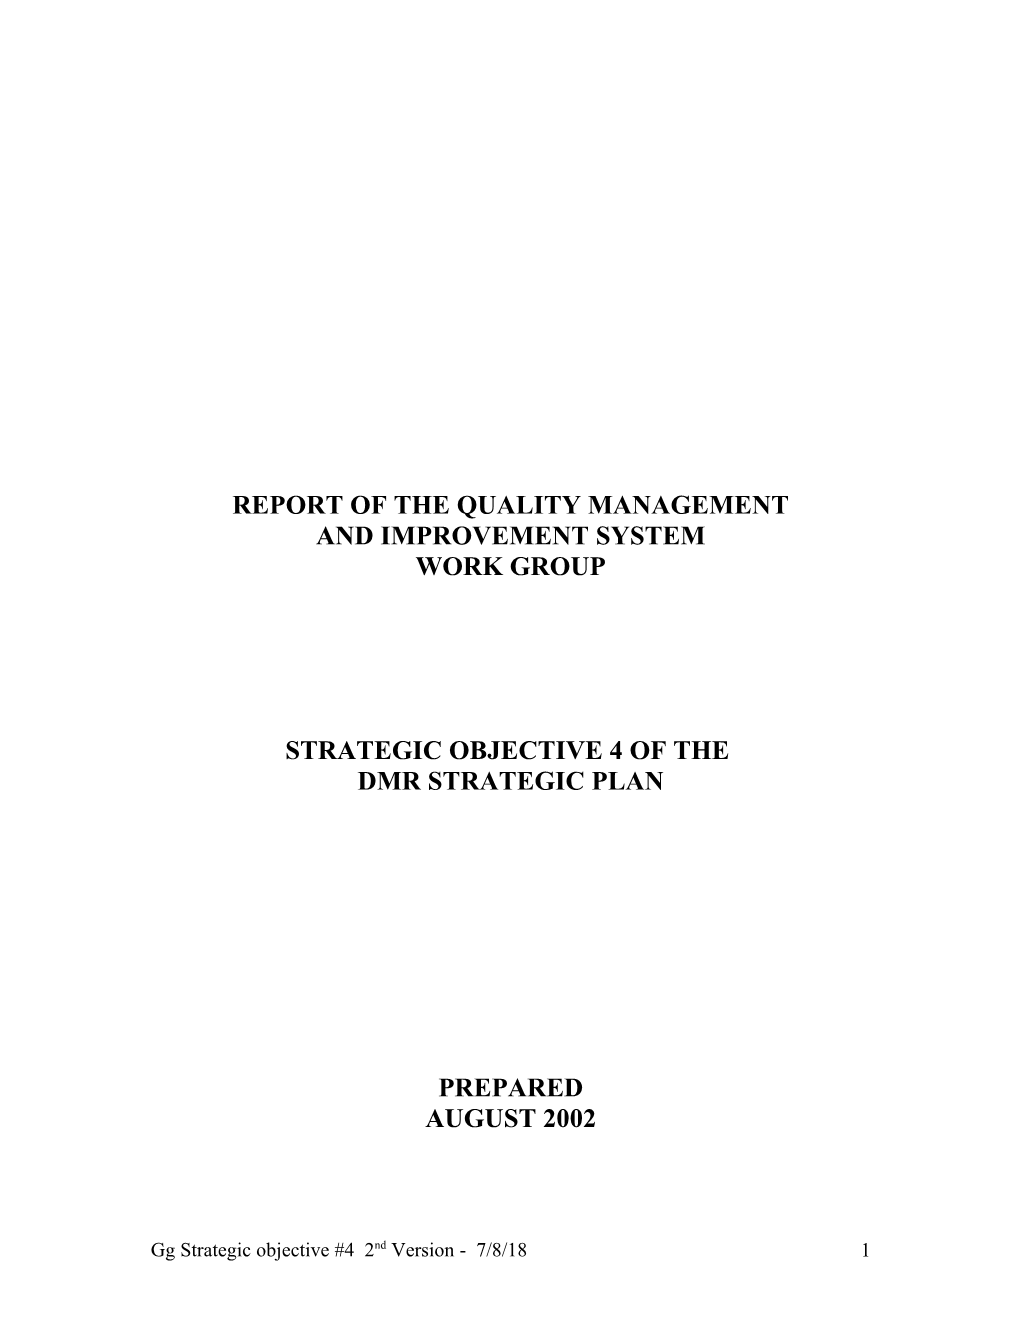 Report of the Quality Management